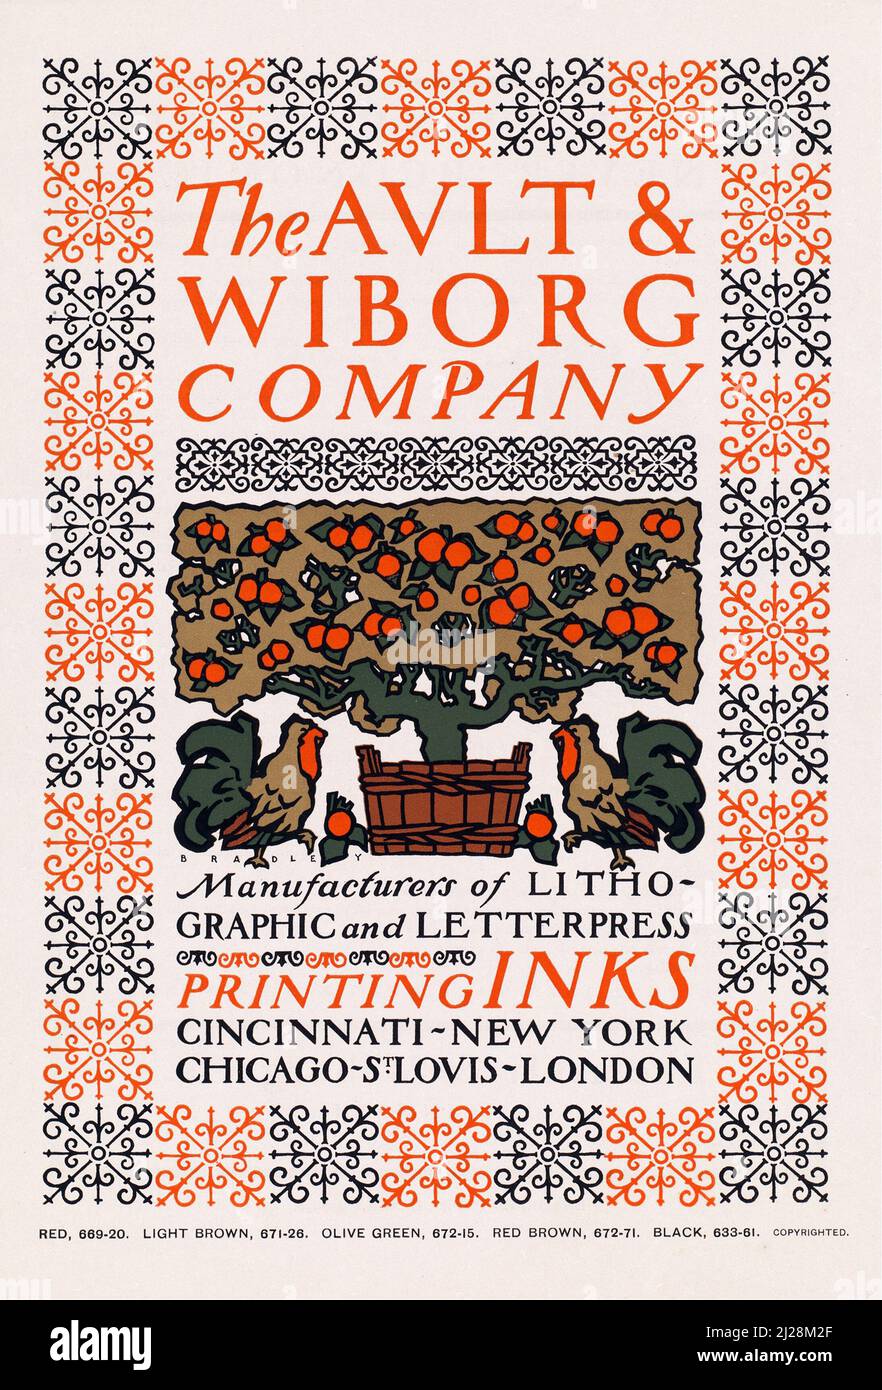 Will Bradley artwork - The Ault and Wiborg company (ca. 1890s) American Art Nouveau - Old and vintage poster Stock Photo